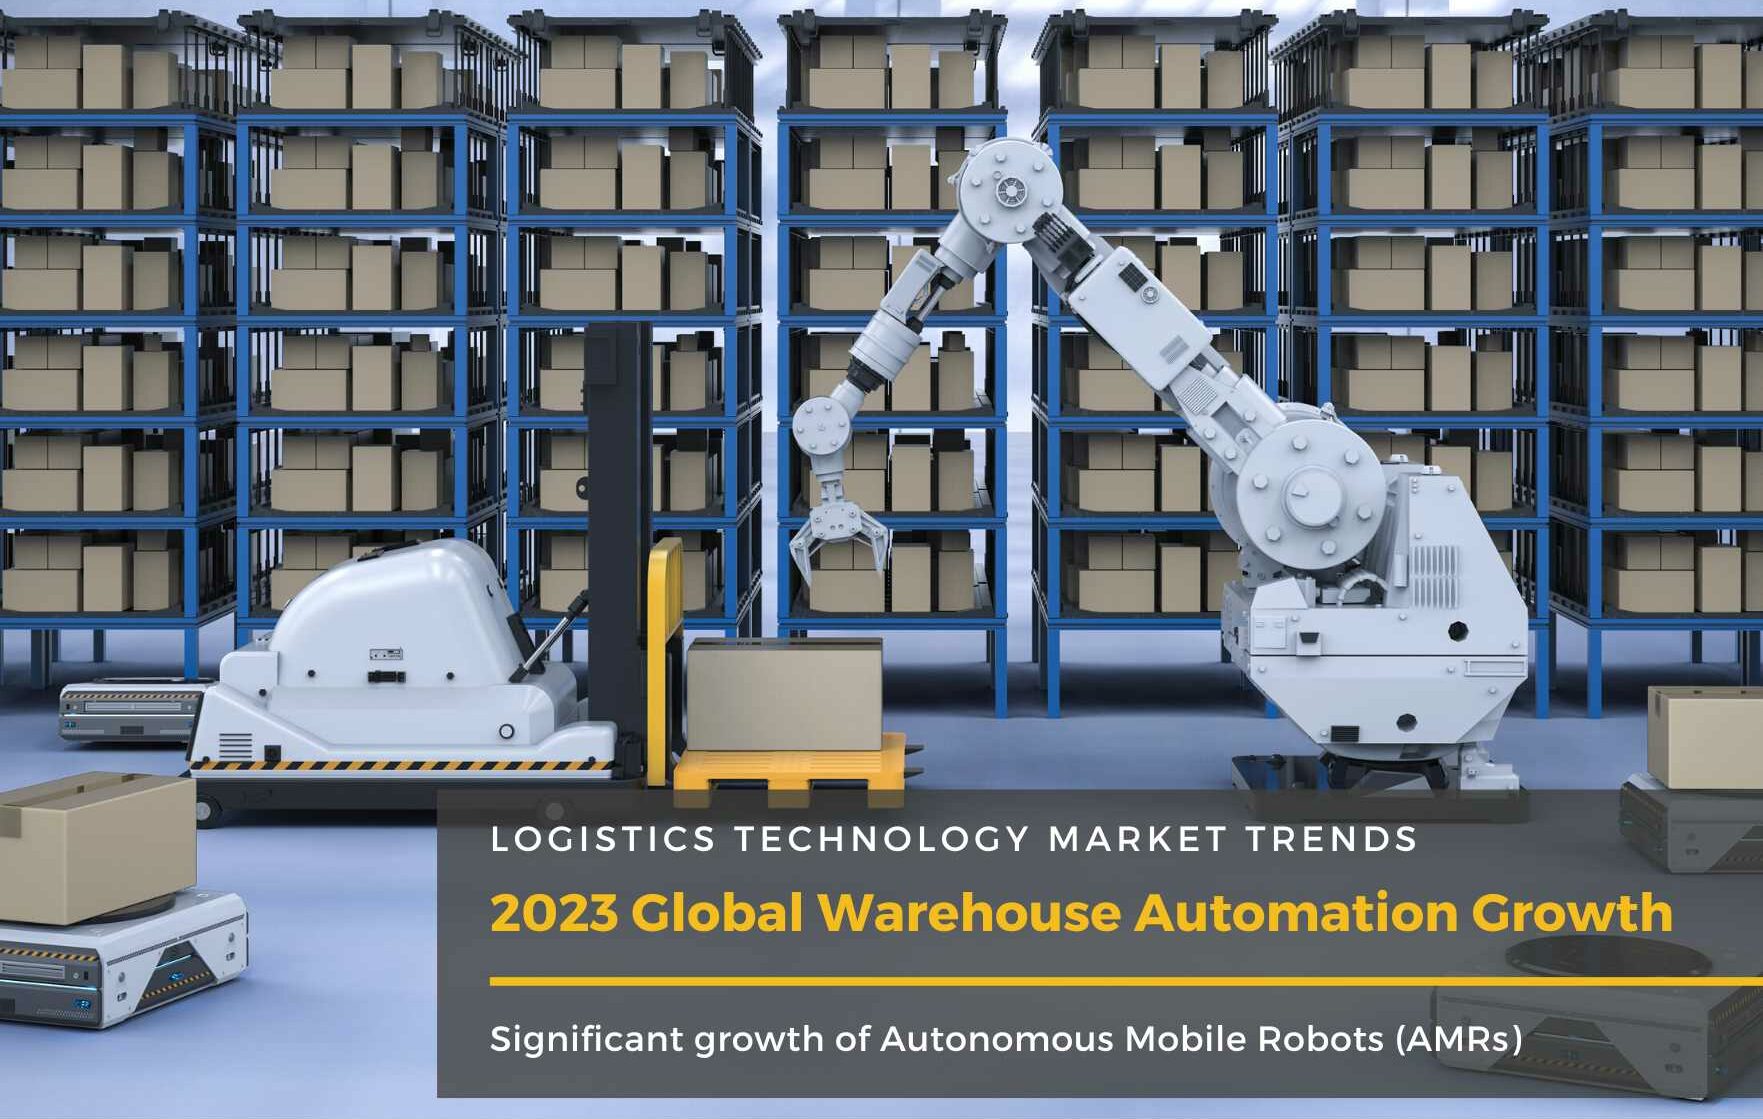 2023 Warehouse Automation Market Trends 002